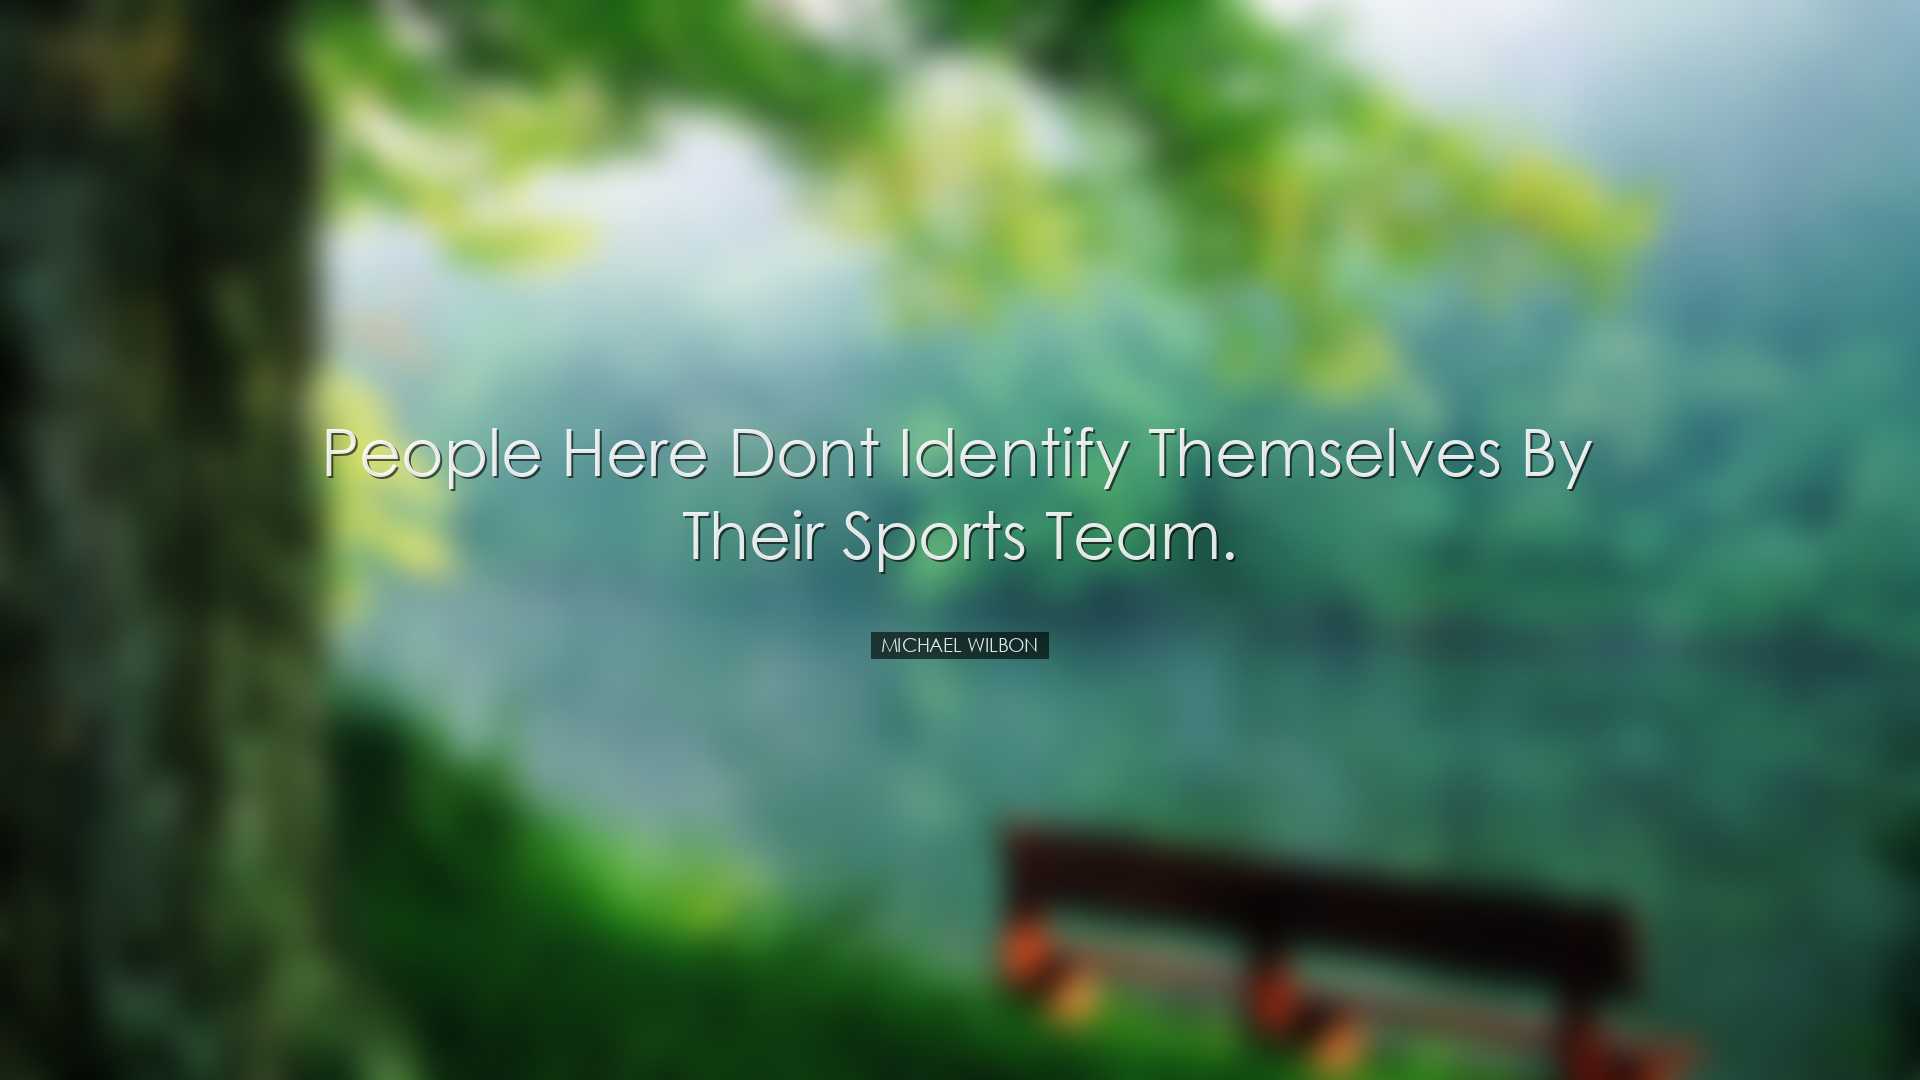 People here dont identify themselves by their sports team. - Micha